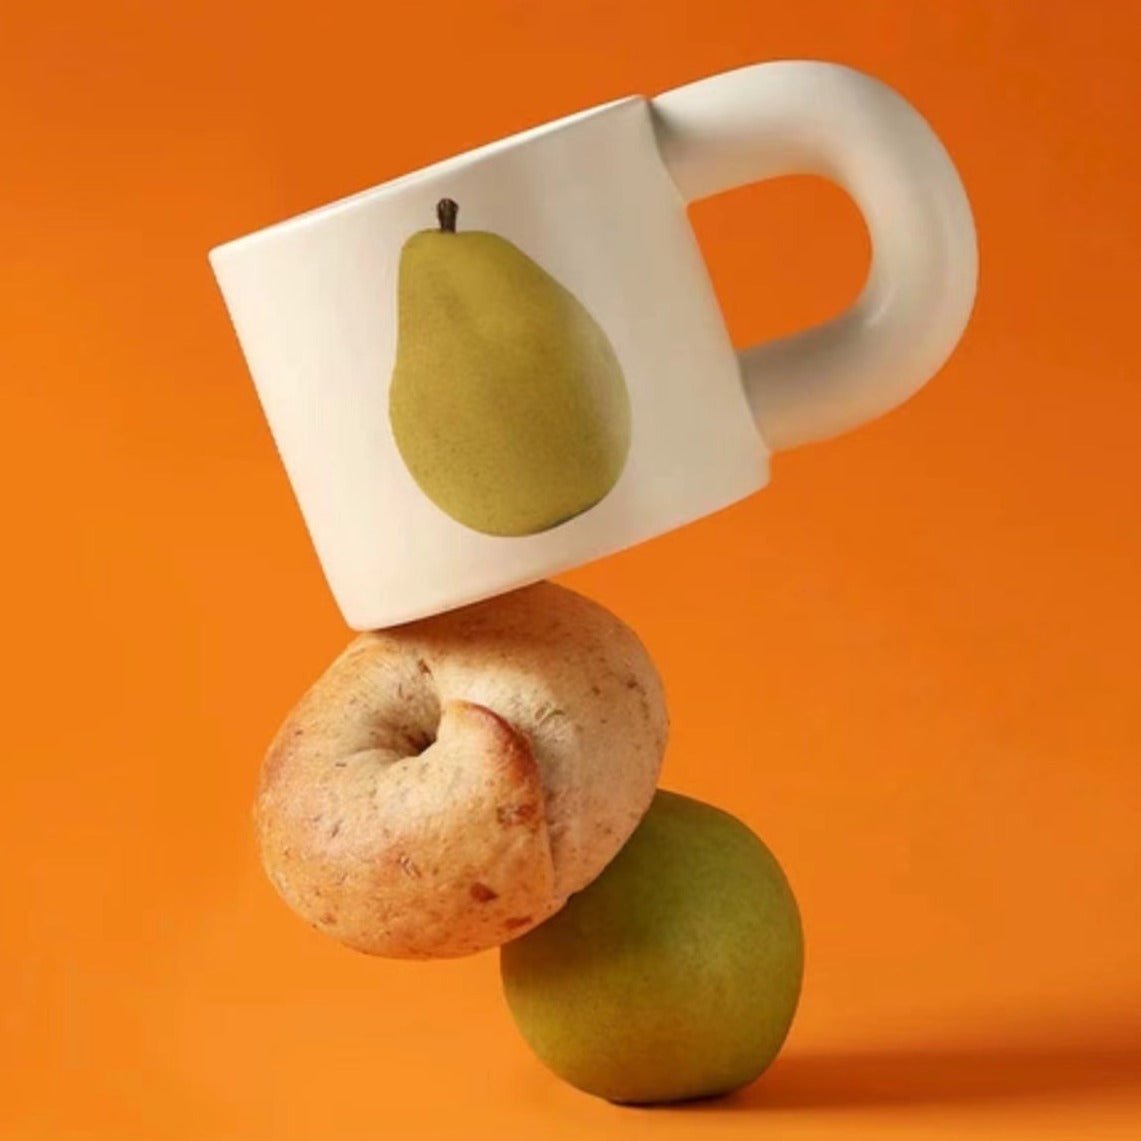 Handcrafted Ceramic Mugs - Apples & Pears